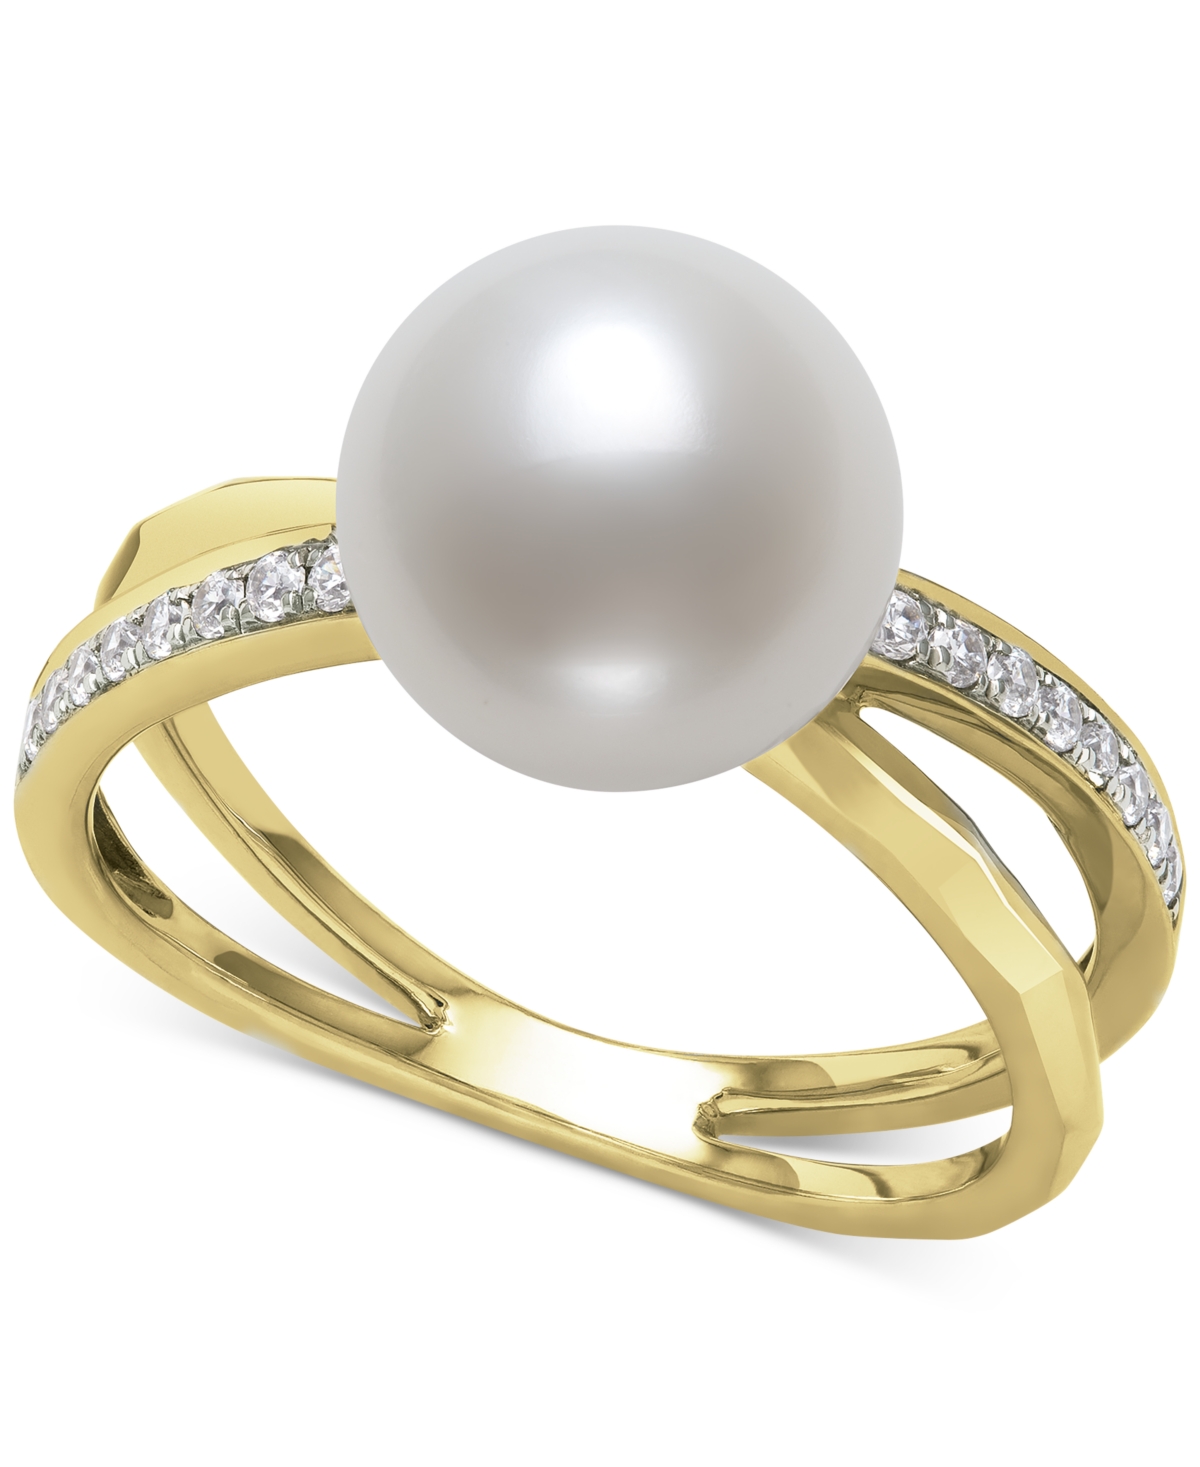 Cultured Freshwater Pearl (8mm) & Diamond (1/10 ct. t.w.) Crisscross Ring in 14k White Gold, Created for Macy's - Yellow Gold